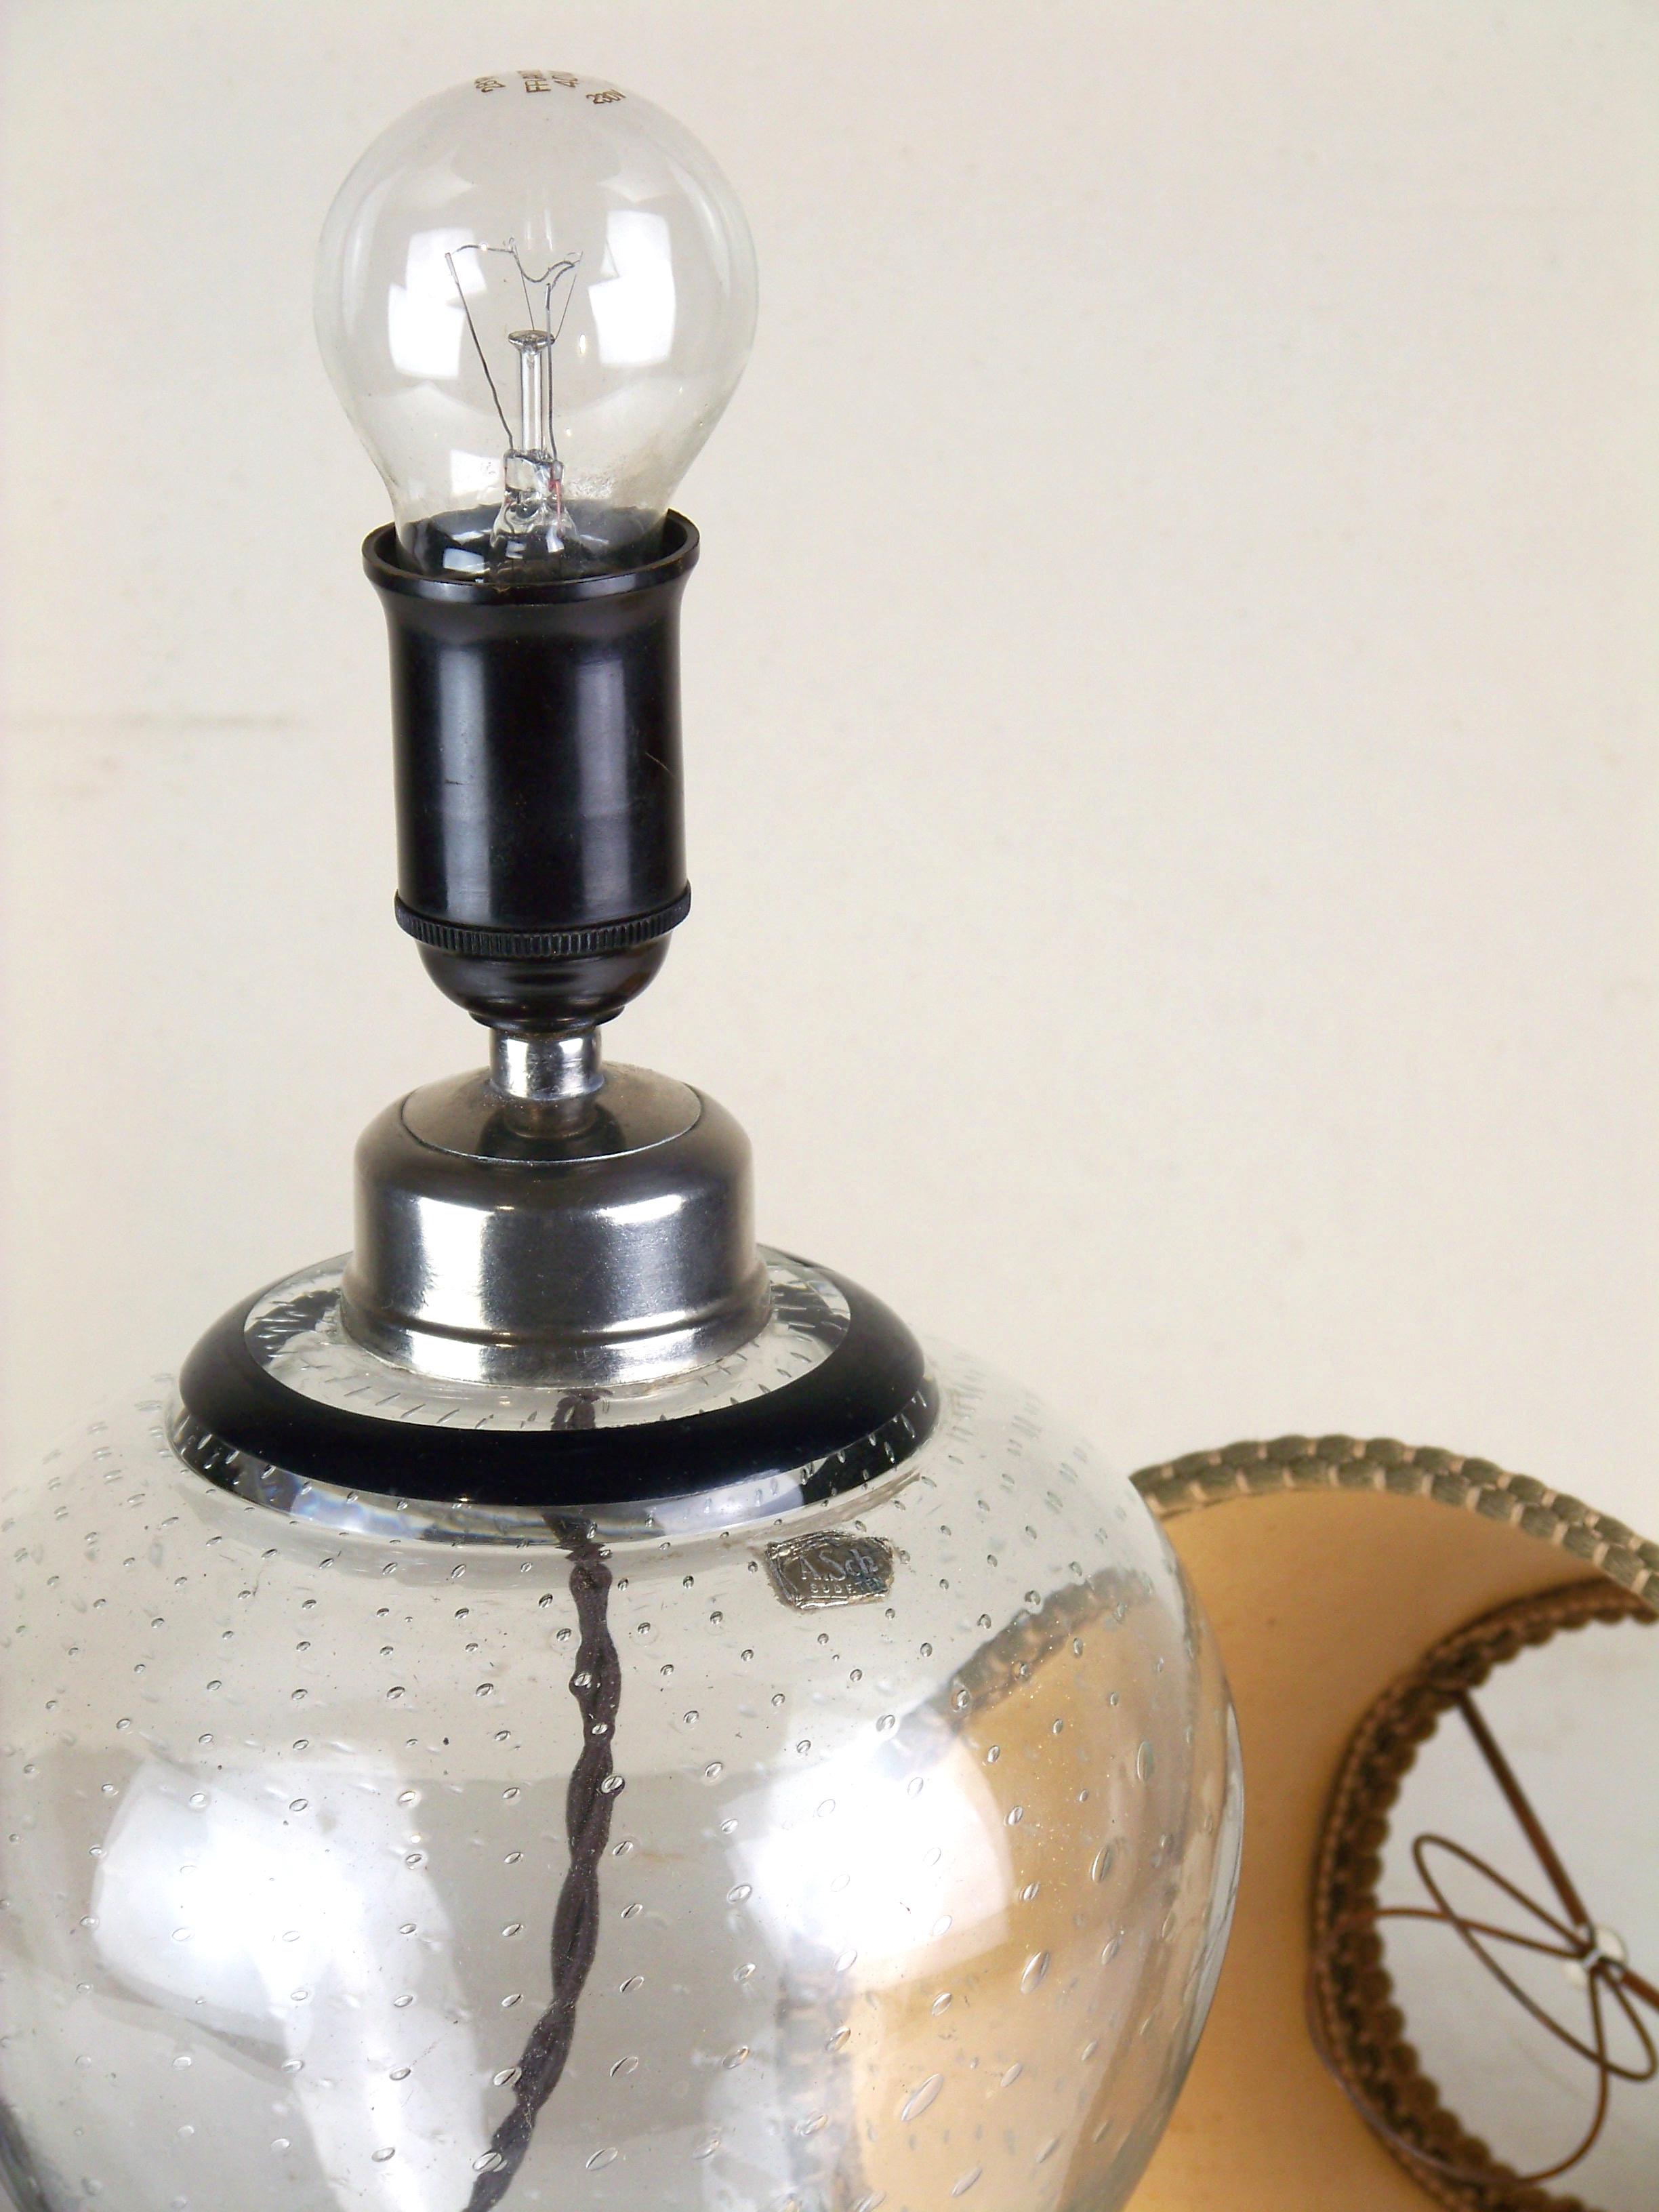 20th Century Table Glass Lamp - A.Sch. Sudetenland, 1938-1945 For Sale